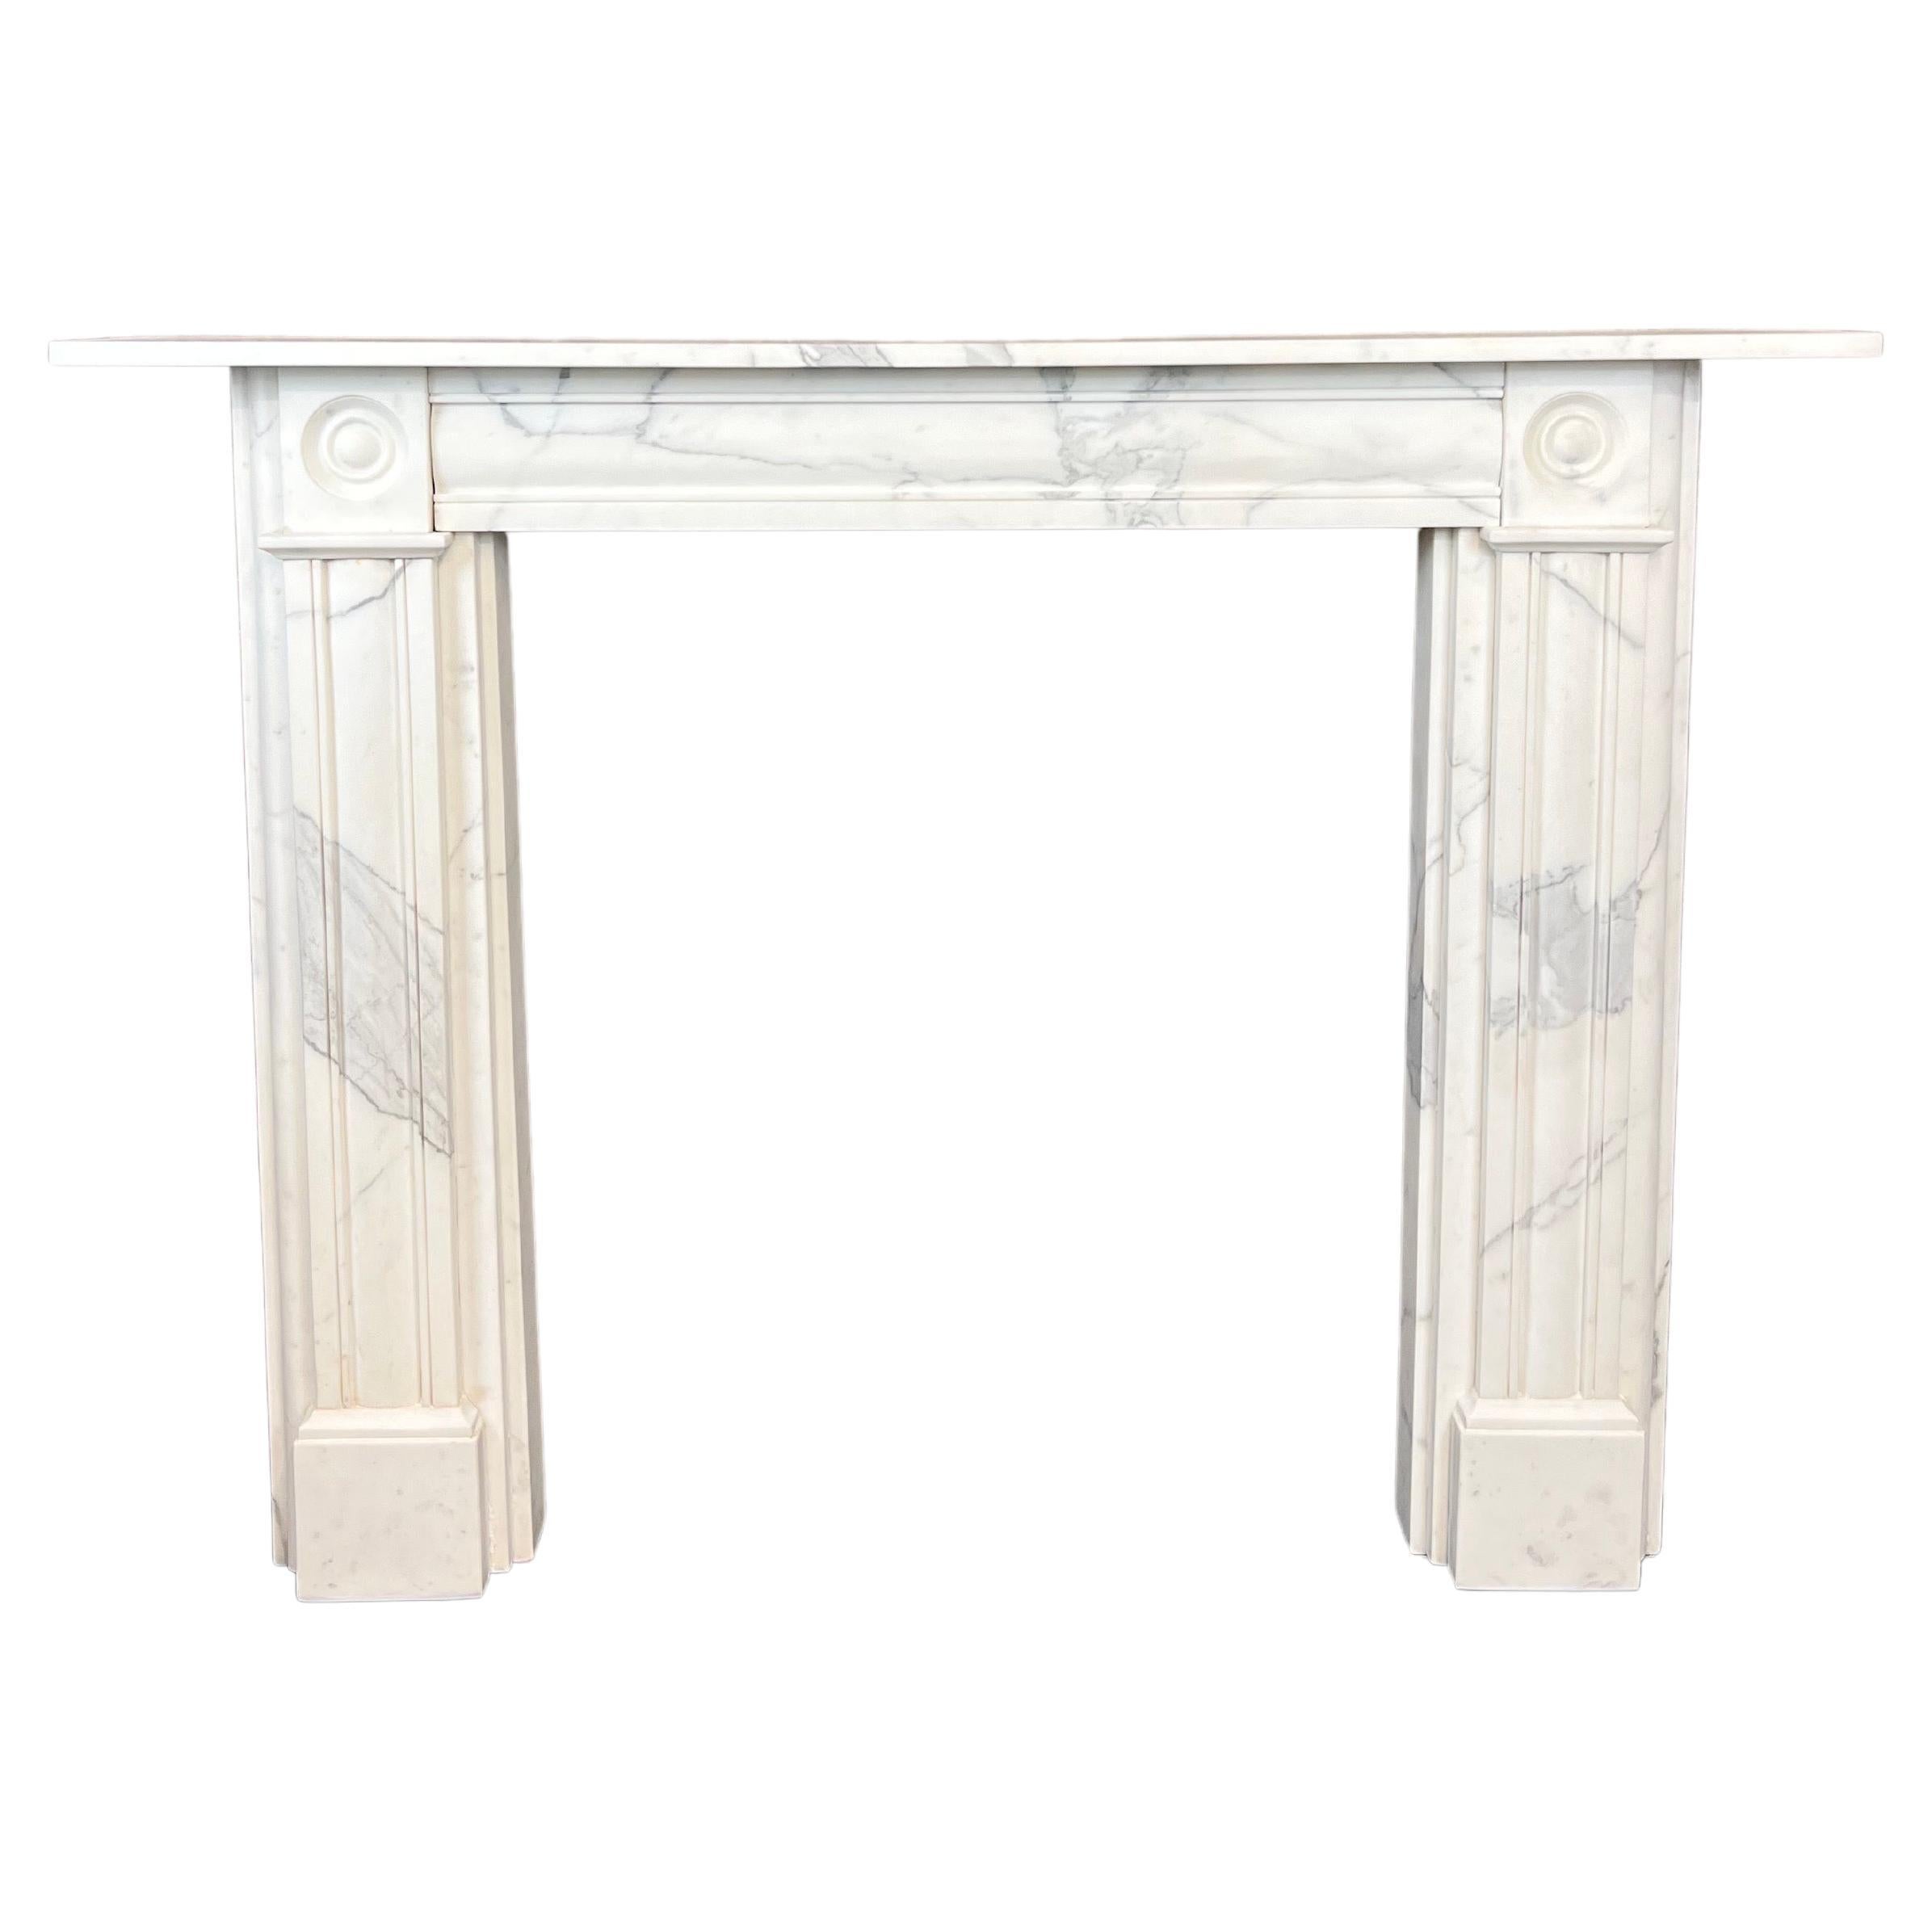 19th Century Carrara Marble Fireplace Mantlepiece.